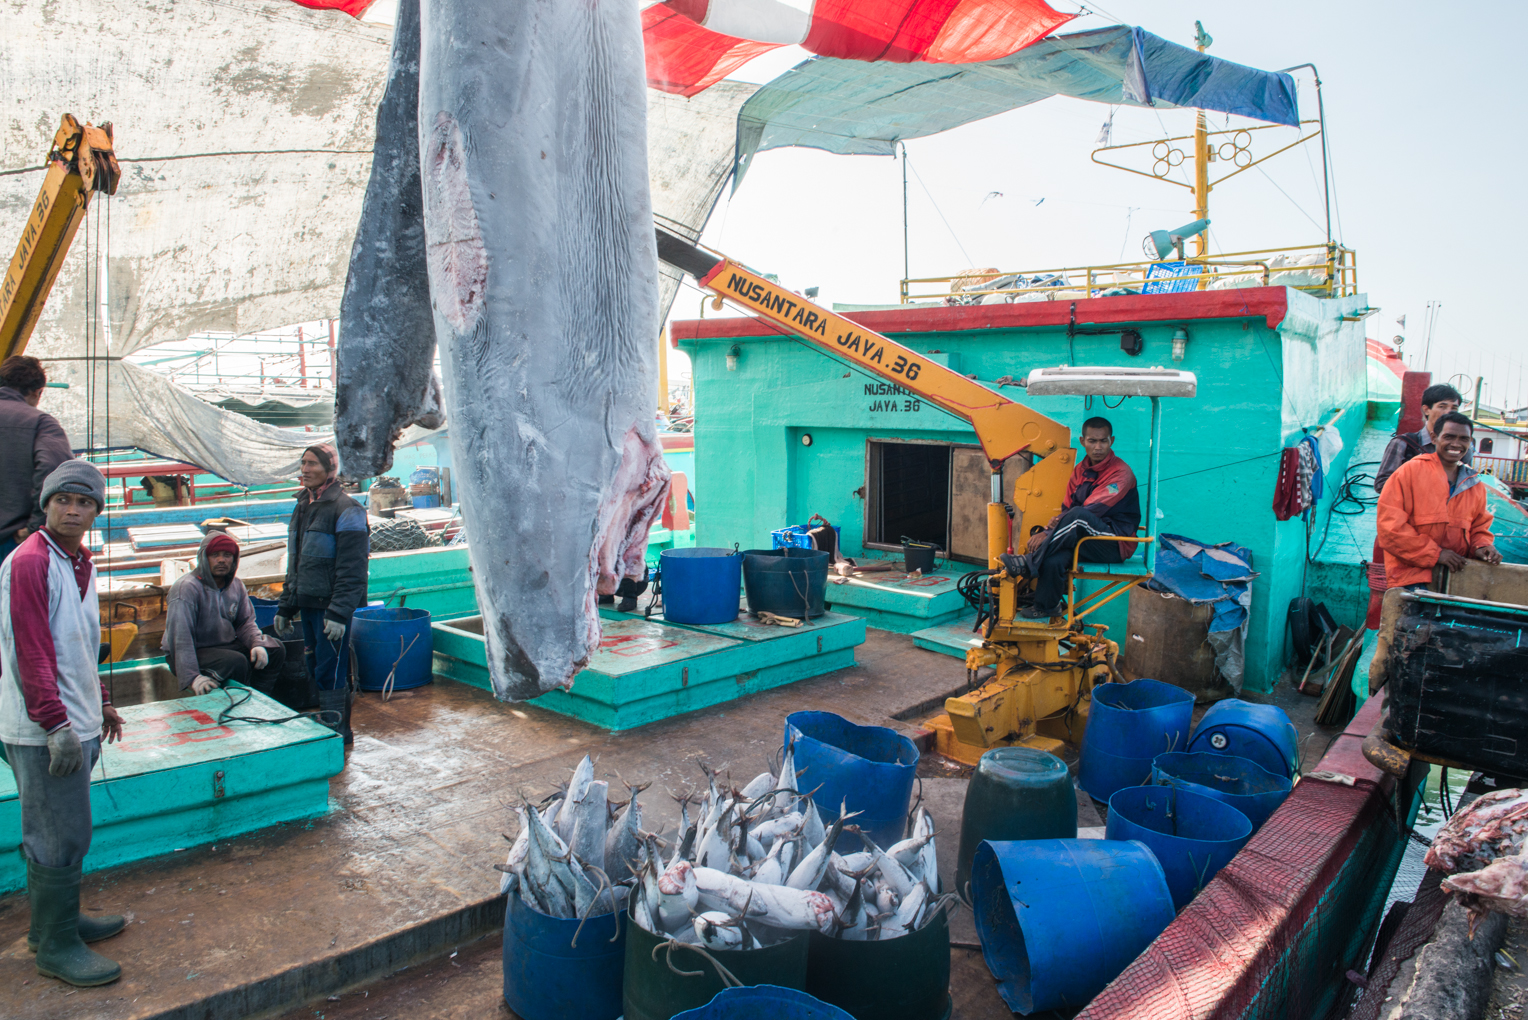 this-shark-meat-will-probably-be-used-to-make-bakso-a-popular-indonesian-soup-dish-photo-by-johnny-langenheim.jpg